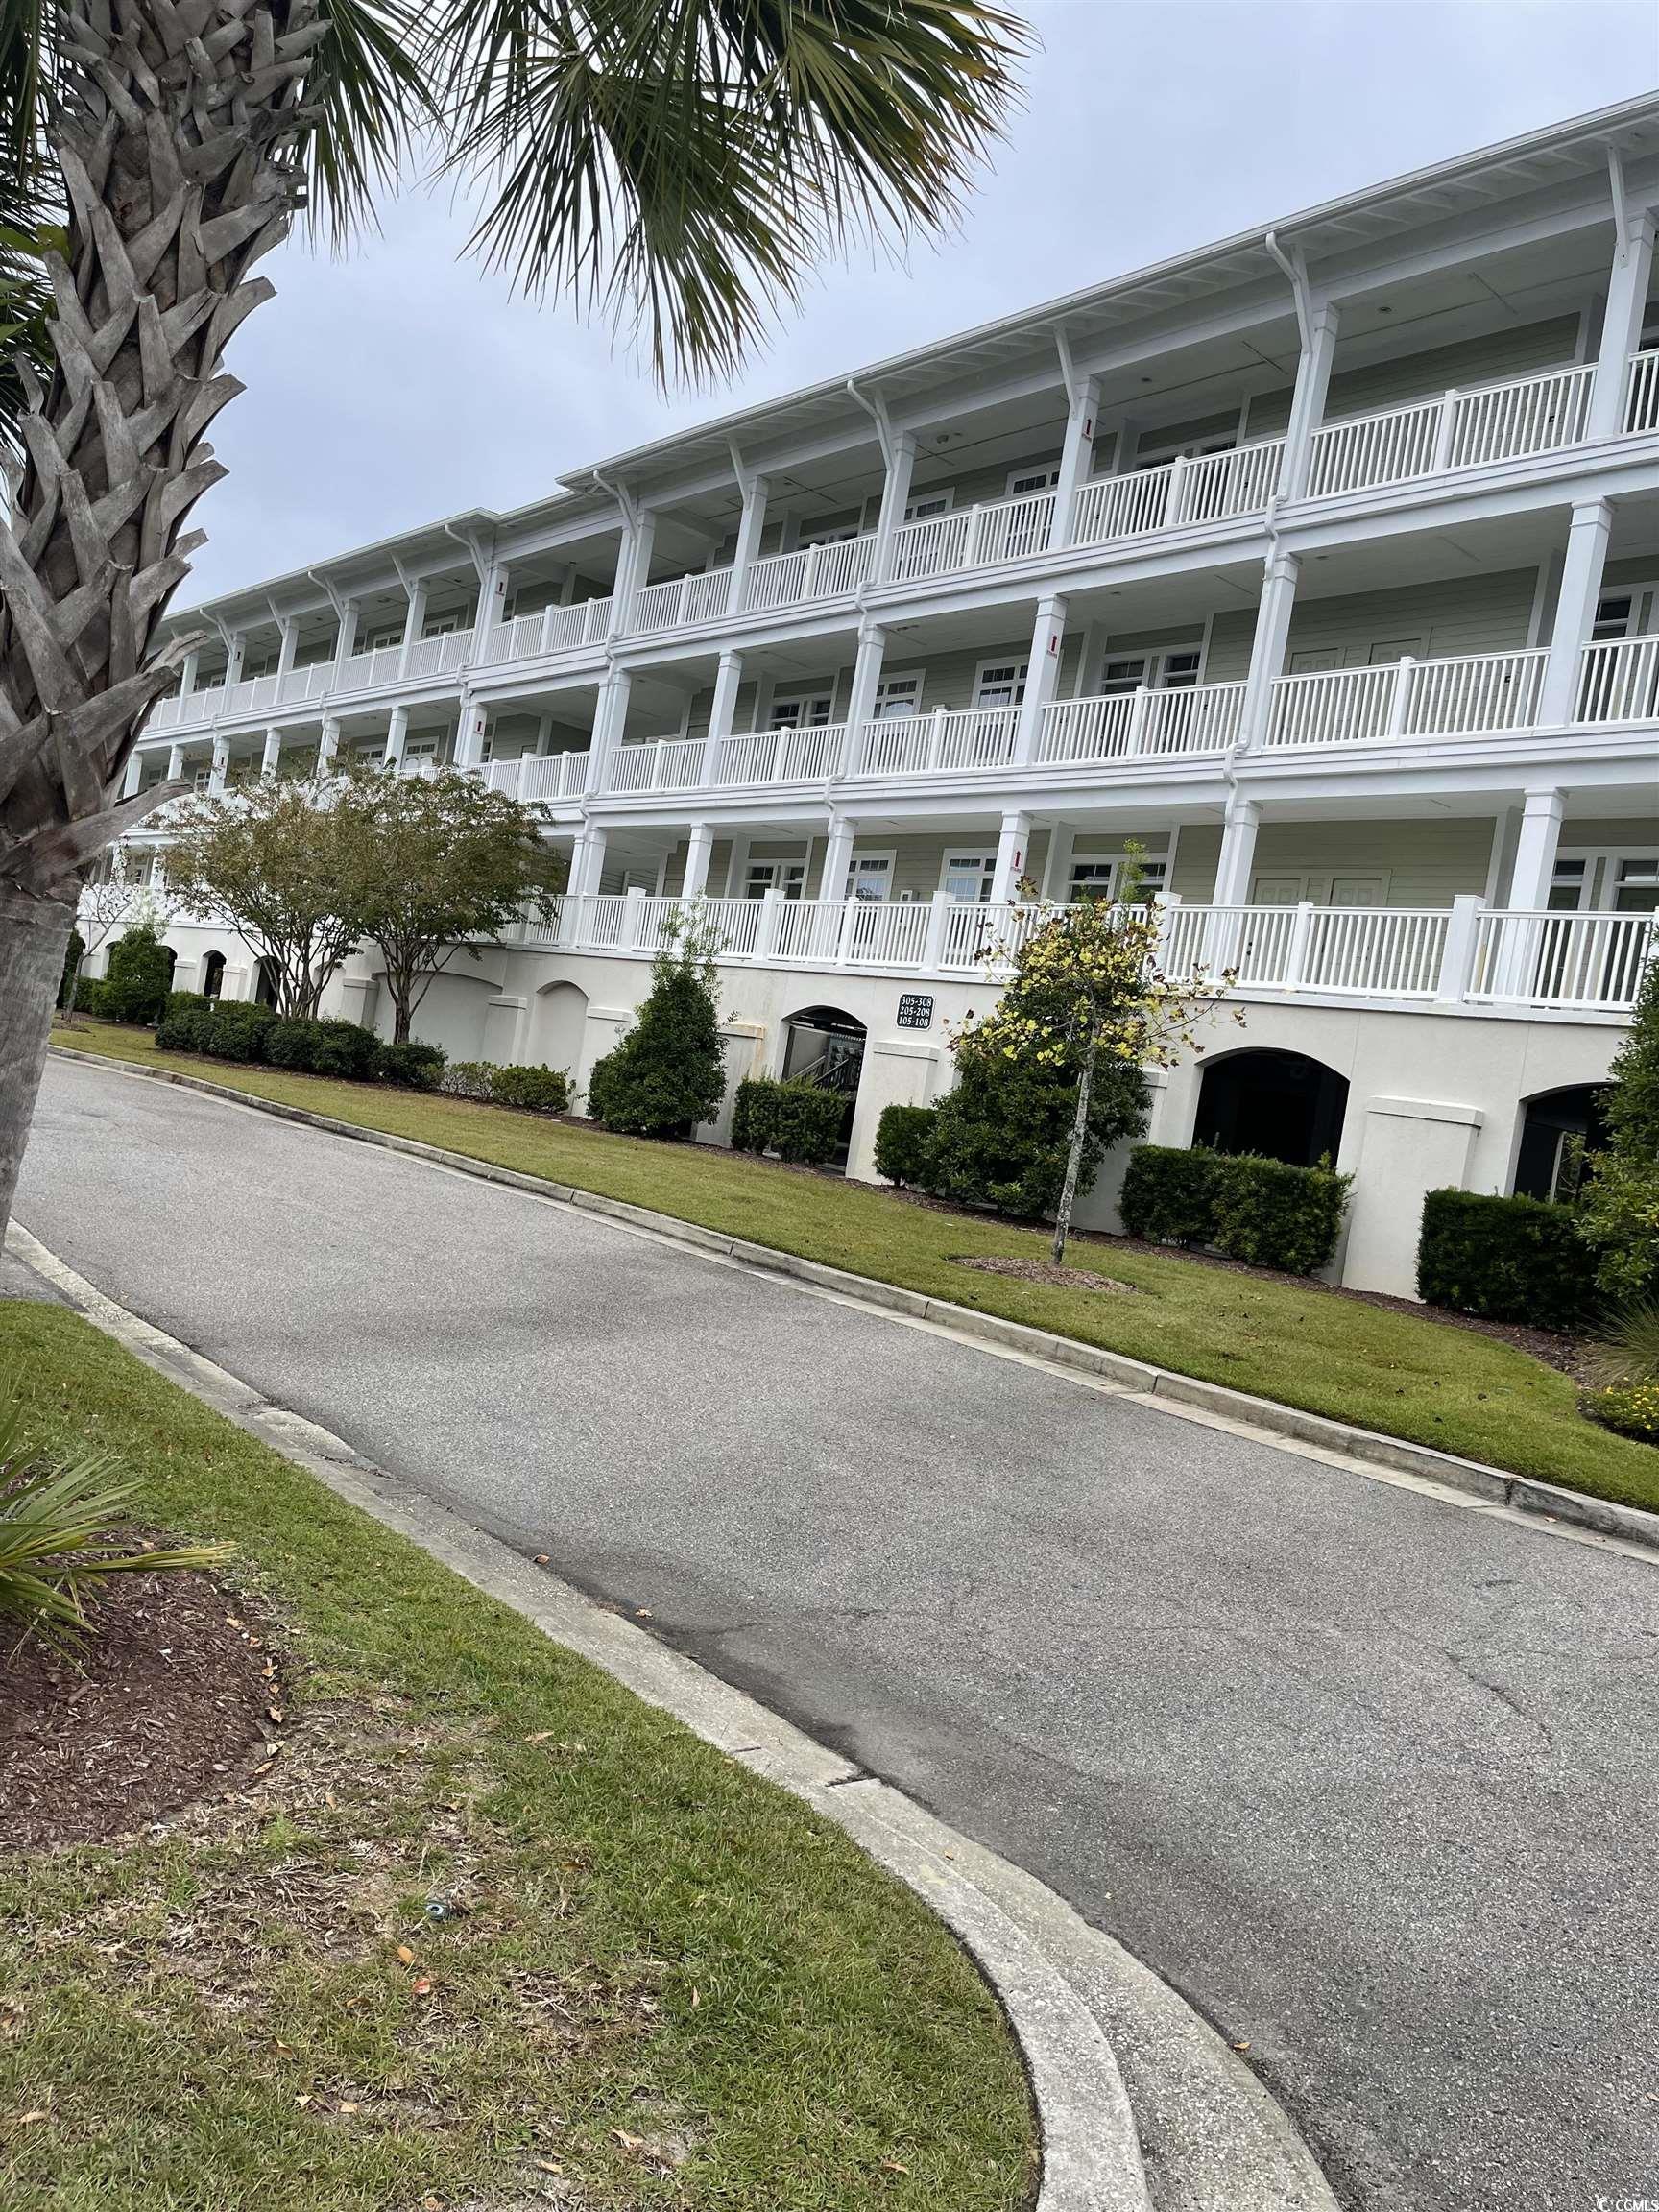 this unit was updated 2021 and is completely furnished.  it is a 2 bedroom and 2 bath lock out. the litchfield by the sea beach access and amenities are top notch. the pawleys island location allows easy access to excellent restaurants, the marsh walk, and brookgreen gardens. georgetown and myrtle beach are just a short distance away. buyers are responsible for confirming all information.